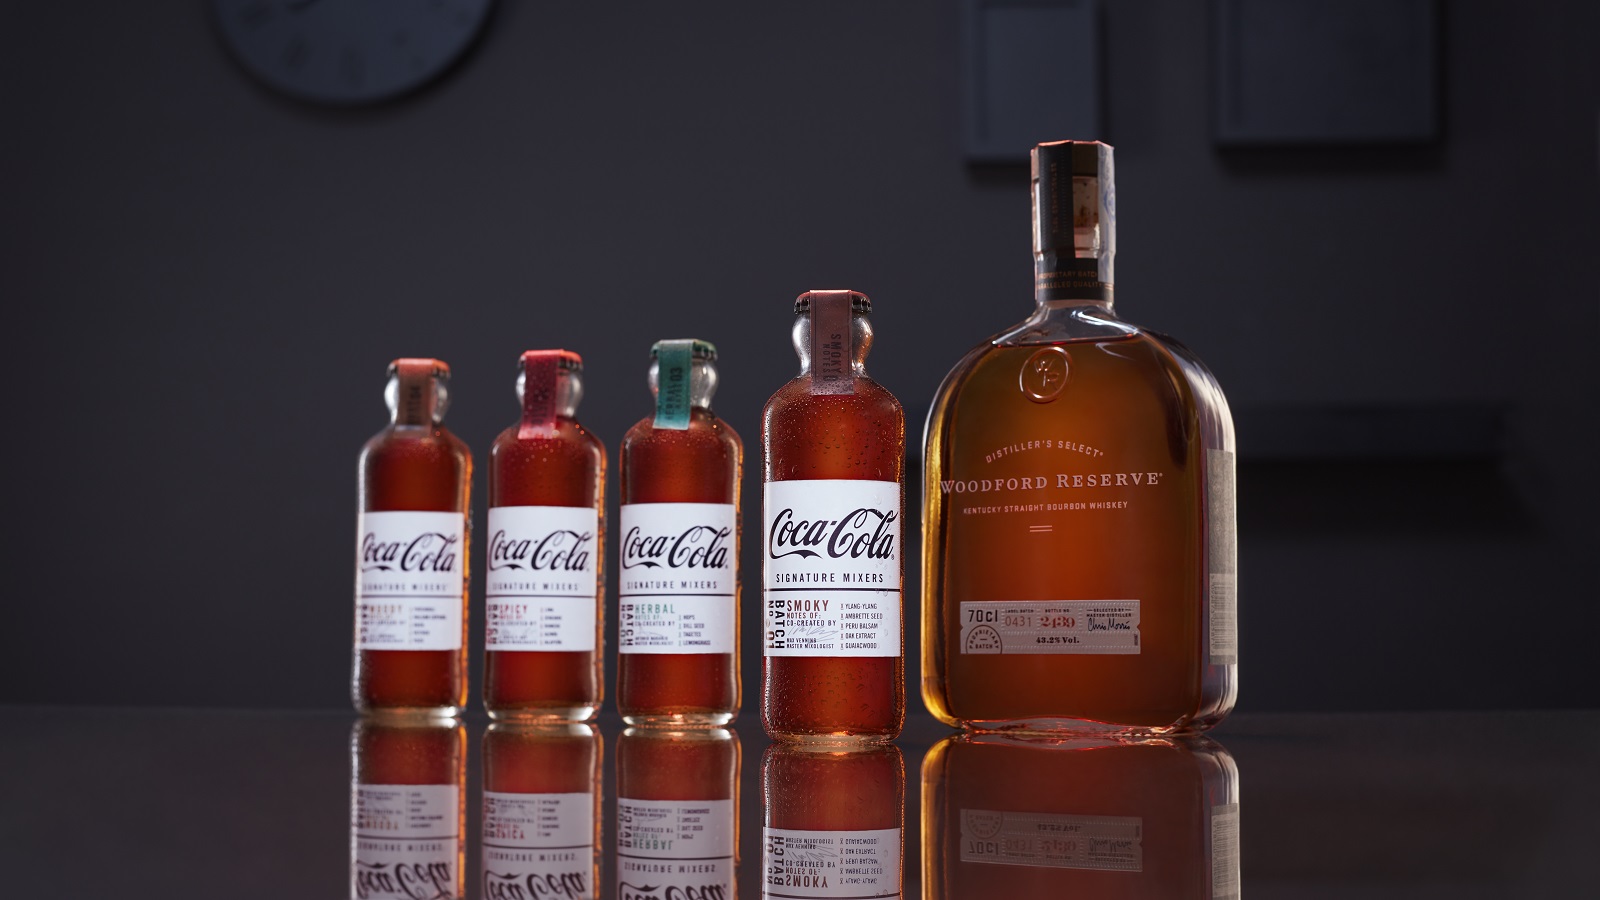 Coca-Cola’s Signature Mixers Perfectly Blend with Dark Spirits